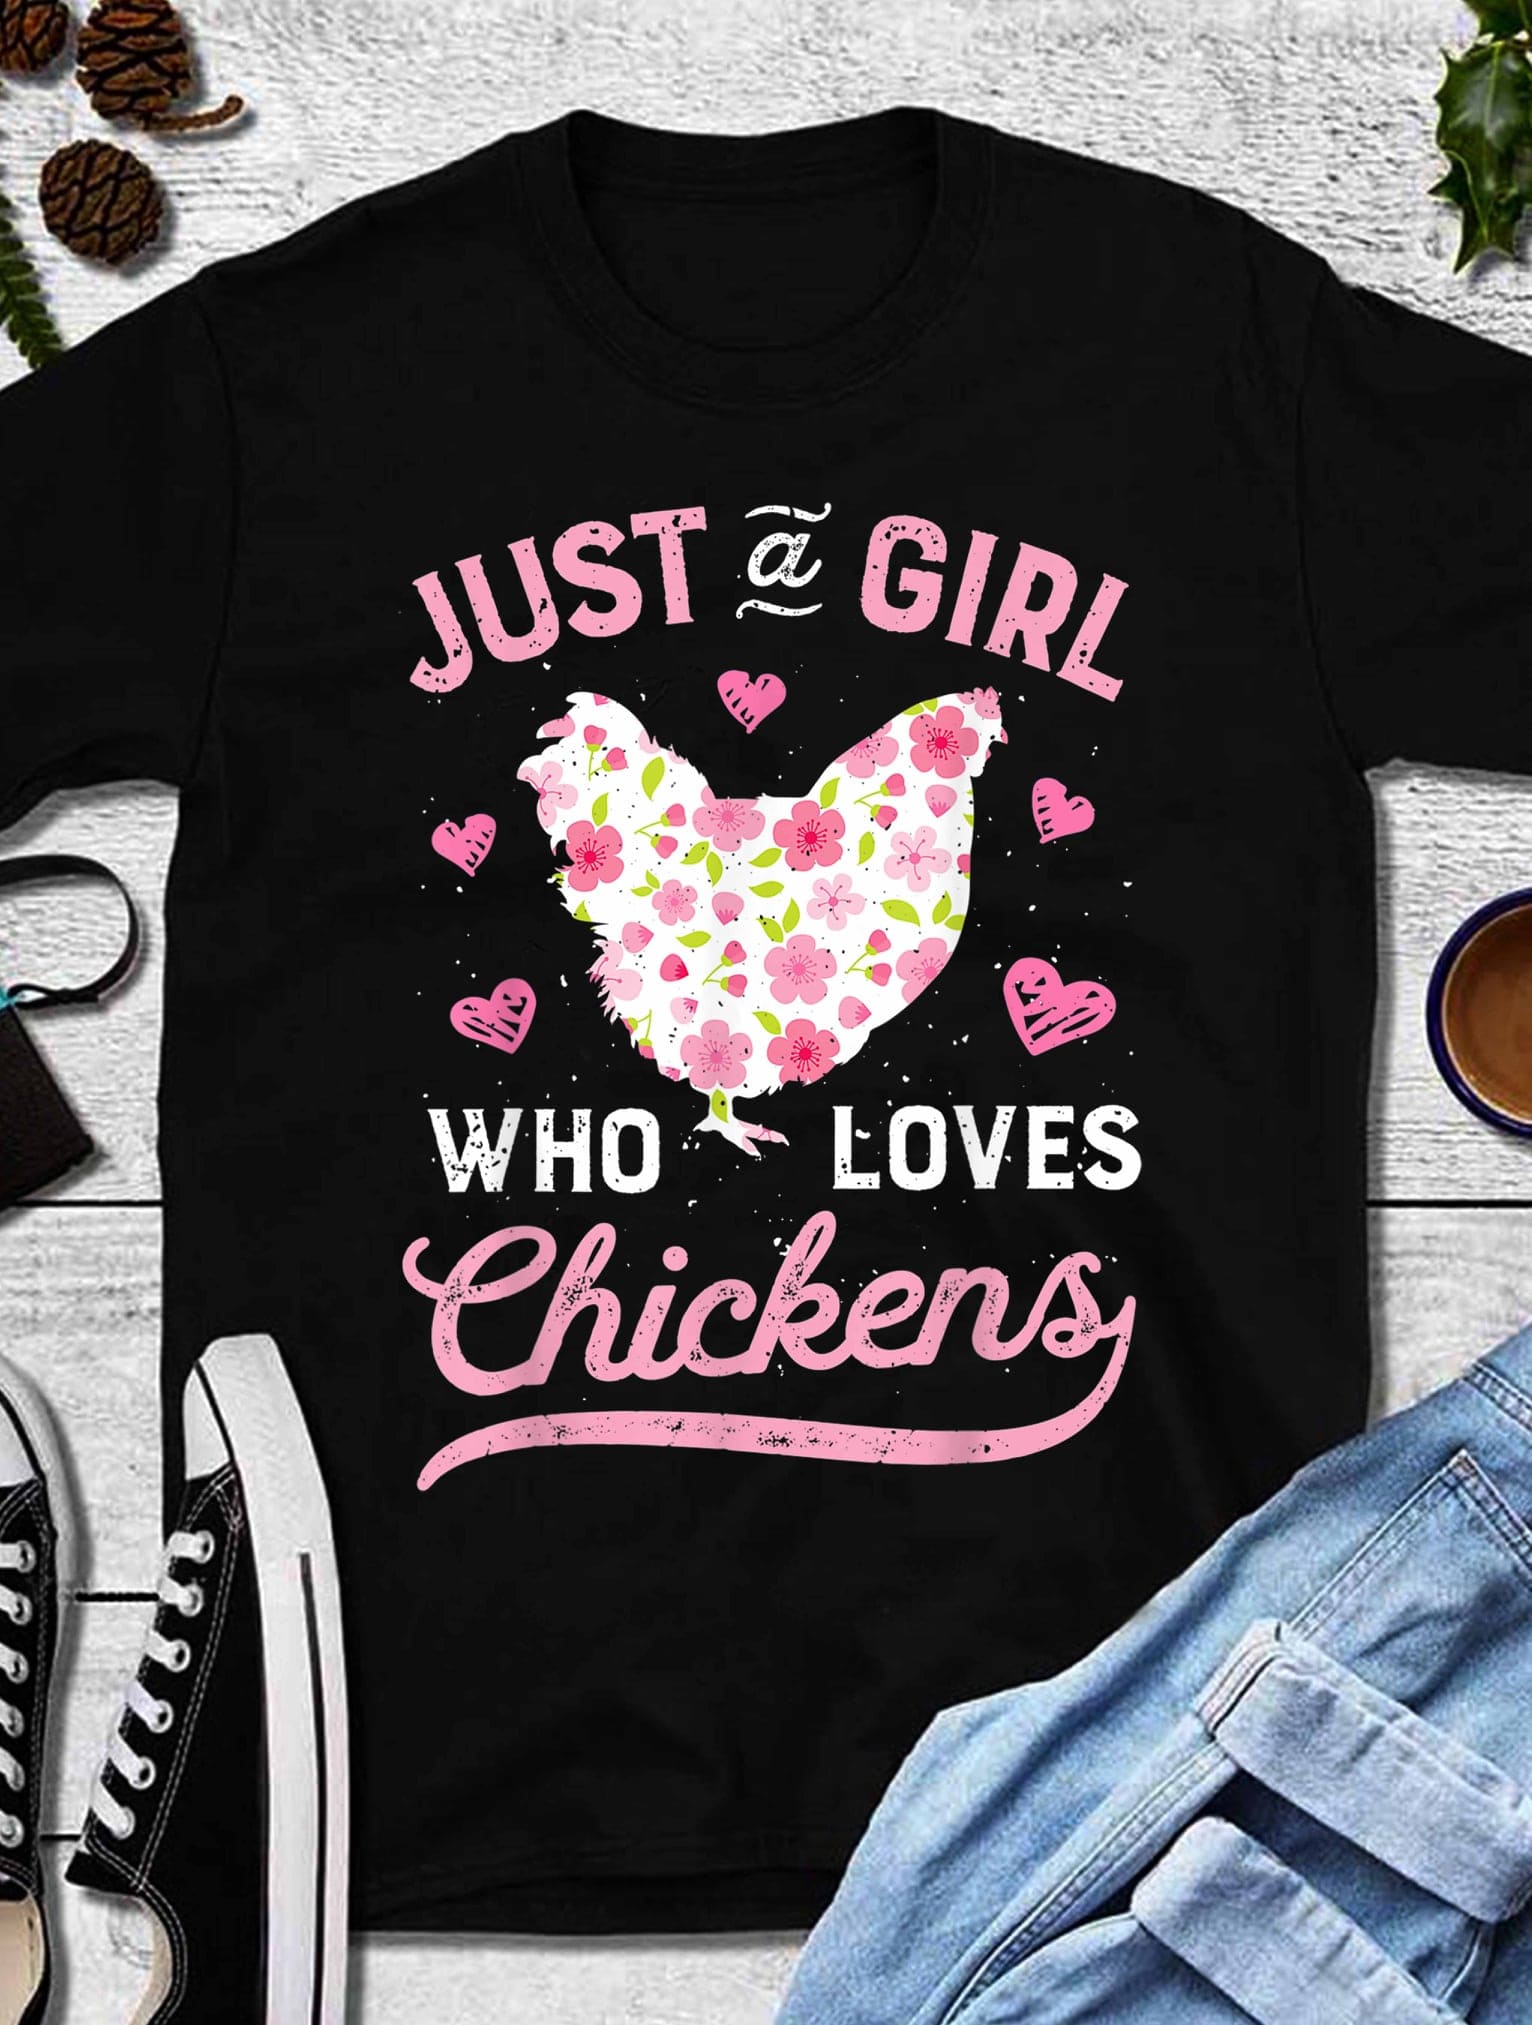 Just a girl who loves chickens - Gift for chicken person, floral chicken graphic T-shirt